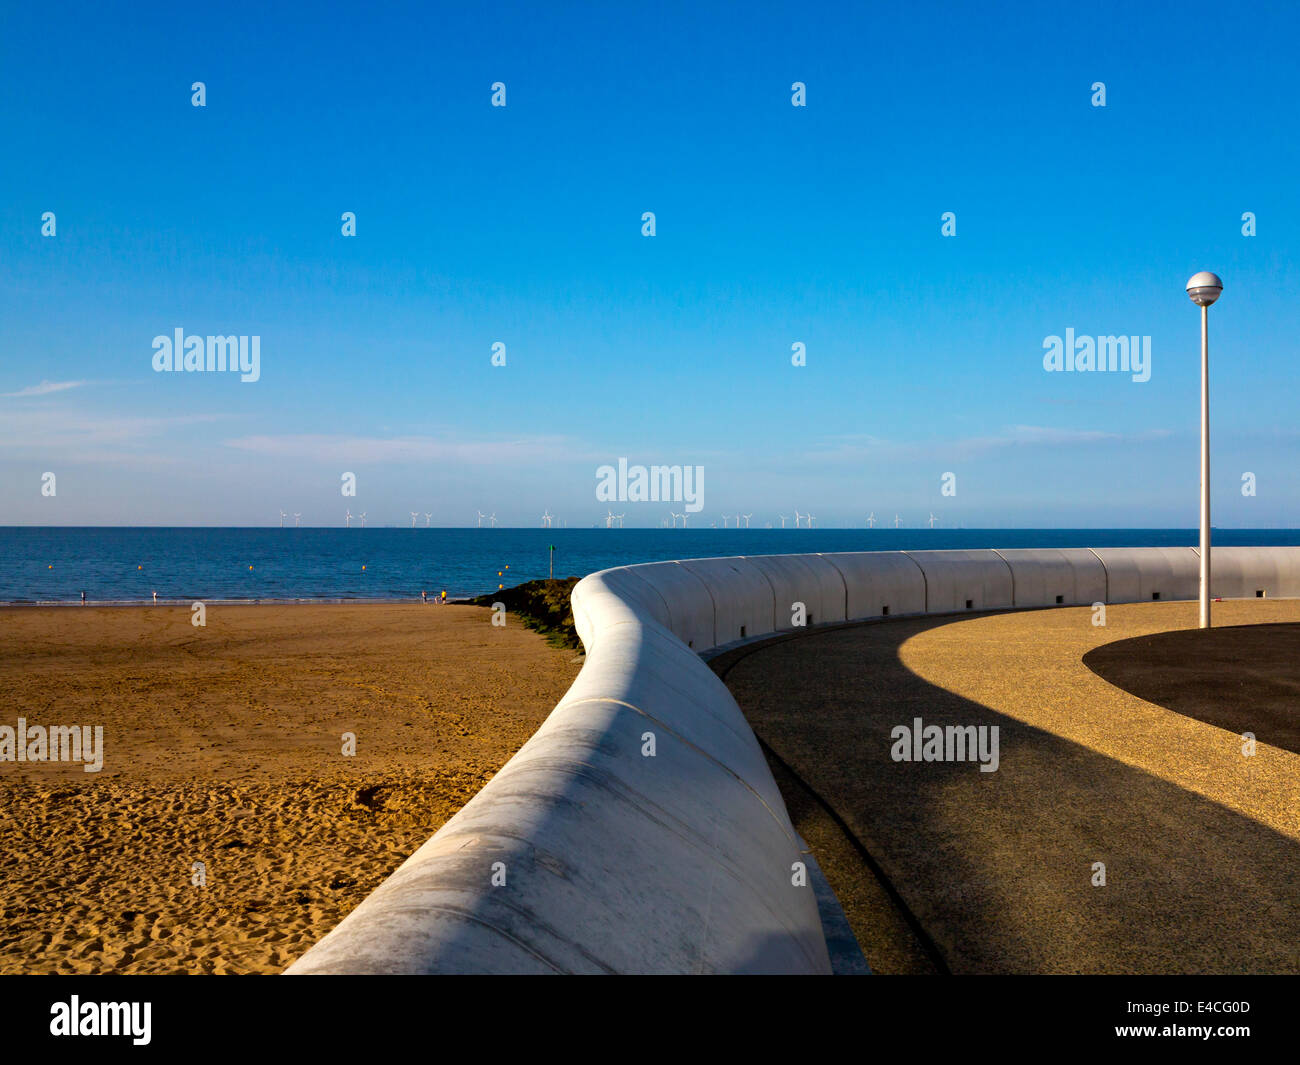 The sandy beach and promenade at Colwyn Bay in Conwy North Wales UK with a curved concrete wall in the foreground Stock Photo